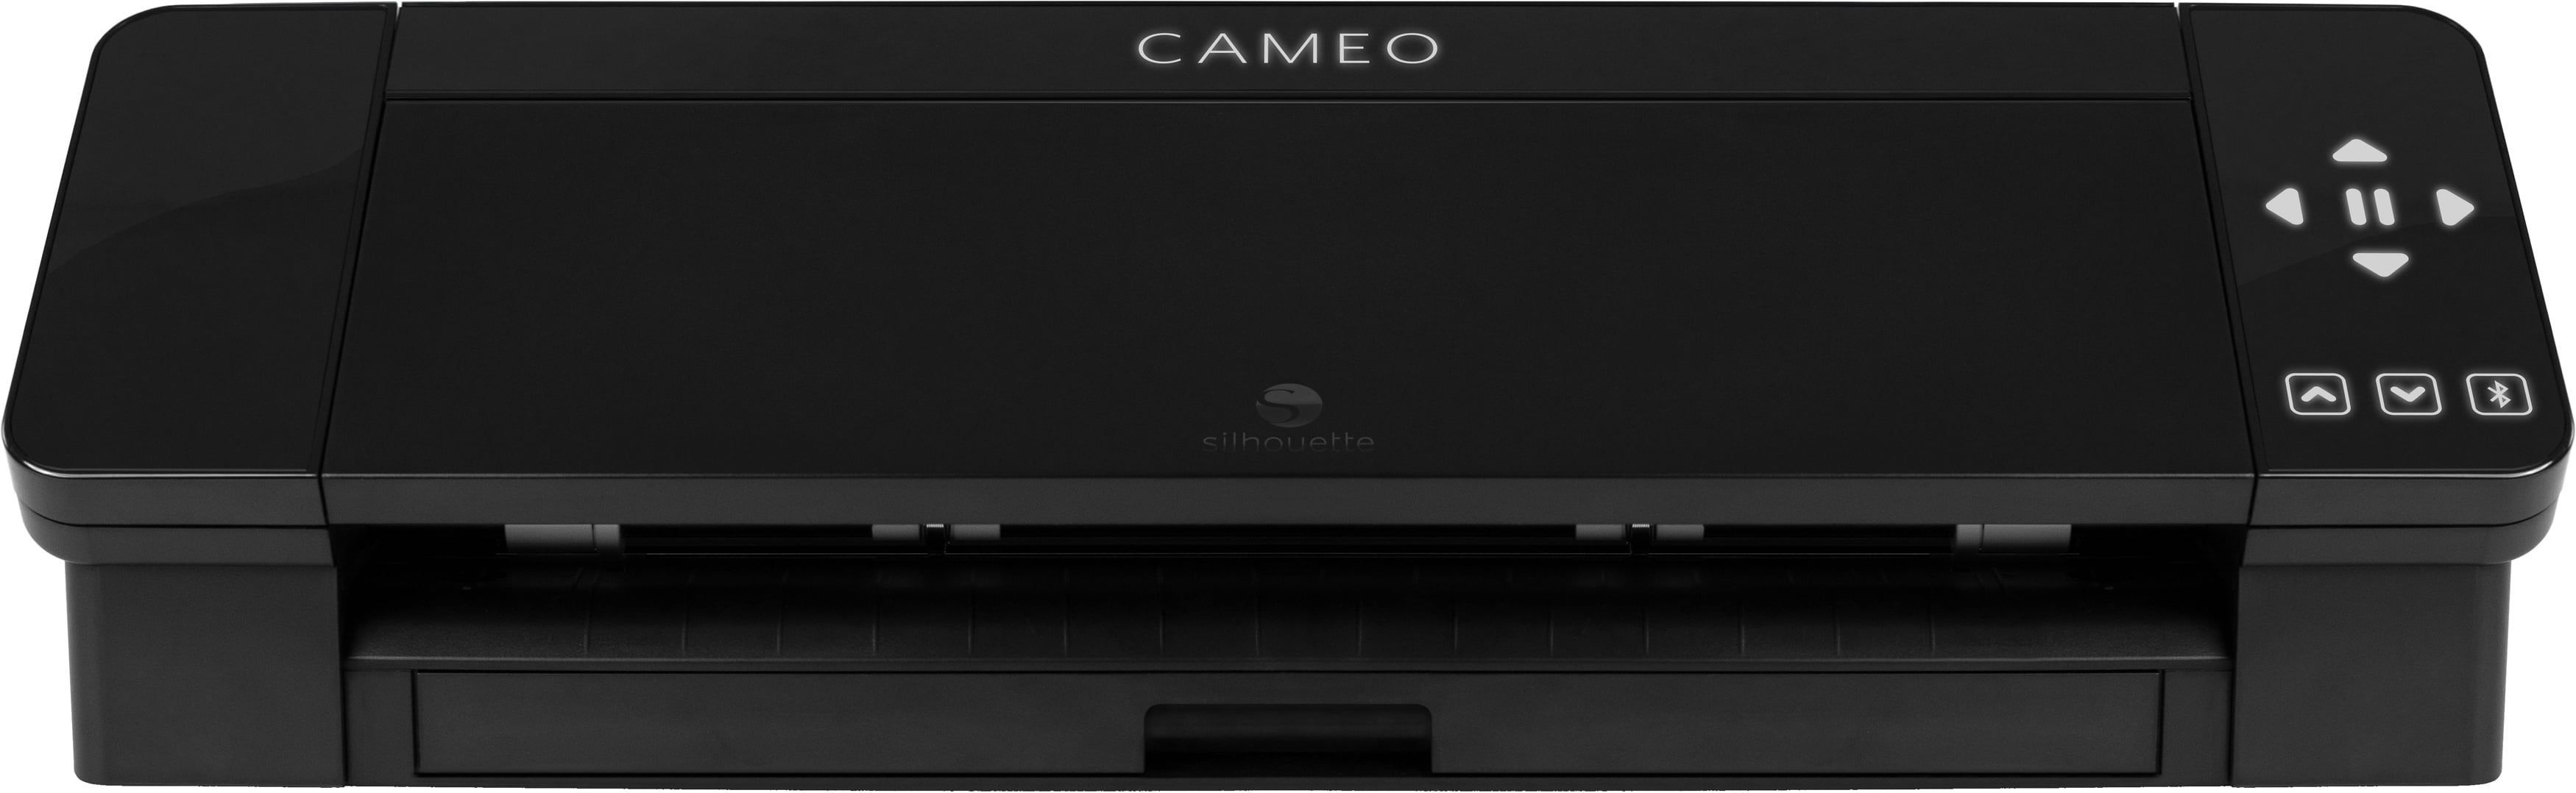 Silhouette Cameo 4 Electronic Cutter, Black - image 3 of 6